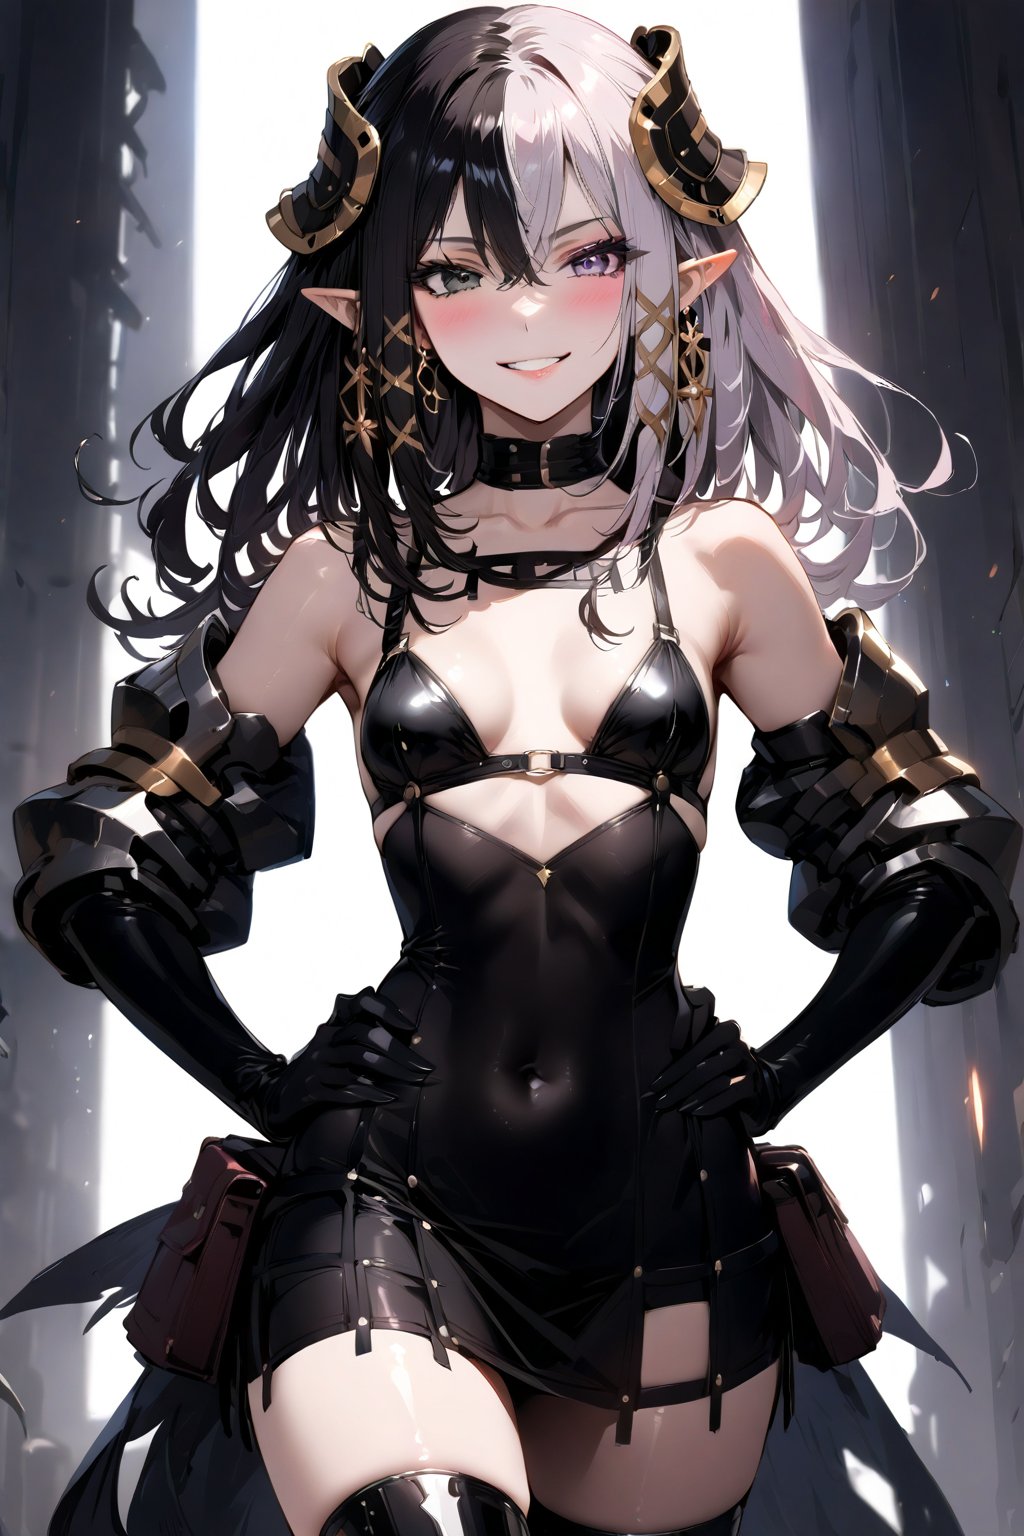 1 girl, alone, Antilene_Heran_Fouche \(overlord\), 1girl, elf, long ears, black eyes, gray eyes, heterochromia, two-tone hair, hair between eyes, exposed abdomen, bangs, small breasts, shiny hair, eyelashes, makeup, lipstick , lips, black bra, black thigh-high stockings, elbow-length gloves, choker, earrings, big smile, very happy, incredibly happy, very blushing, blushing face, masterful work of art, incredibly detailed, top quality, beautiful, standing, with hands on hips.,mirham